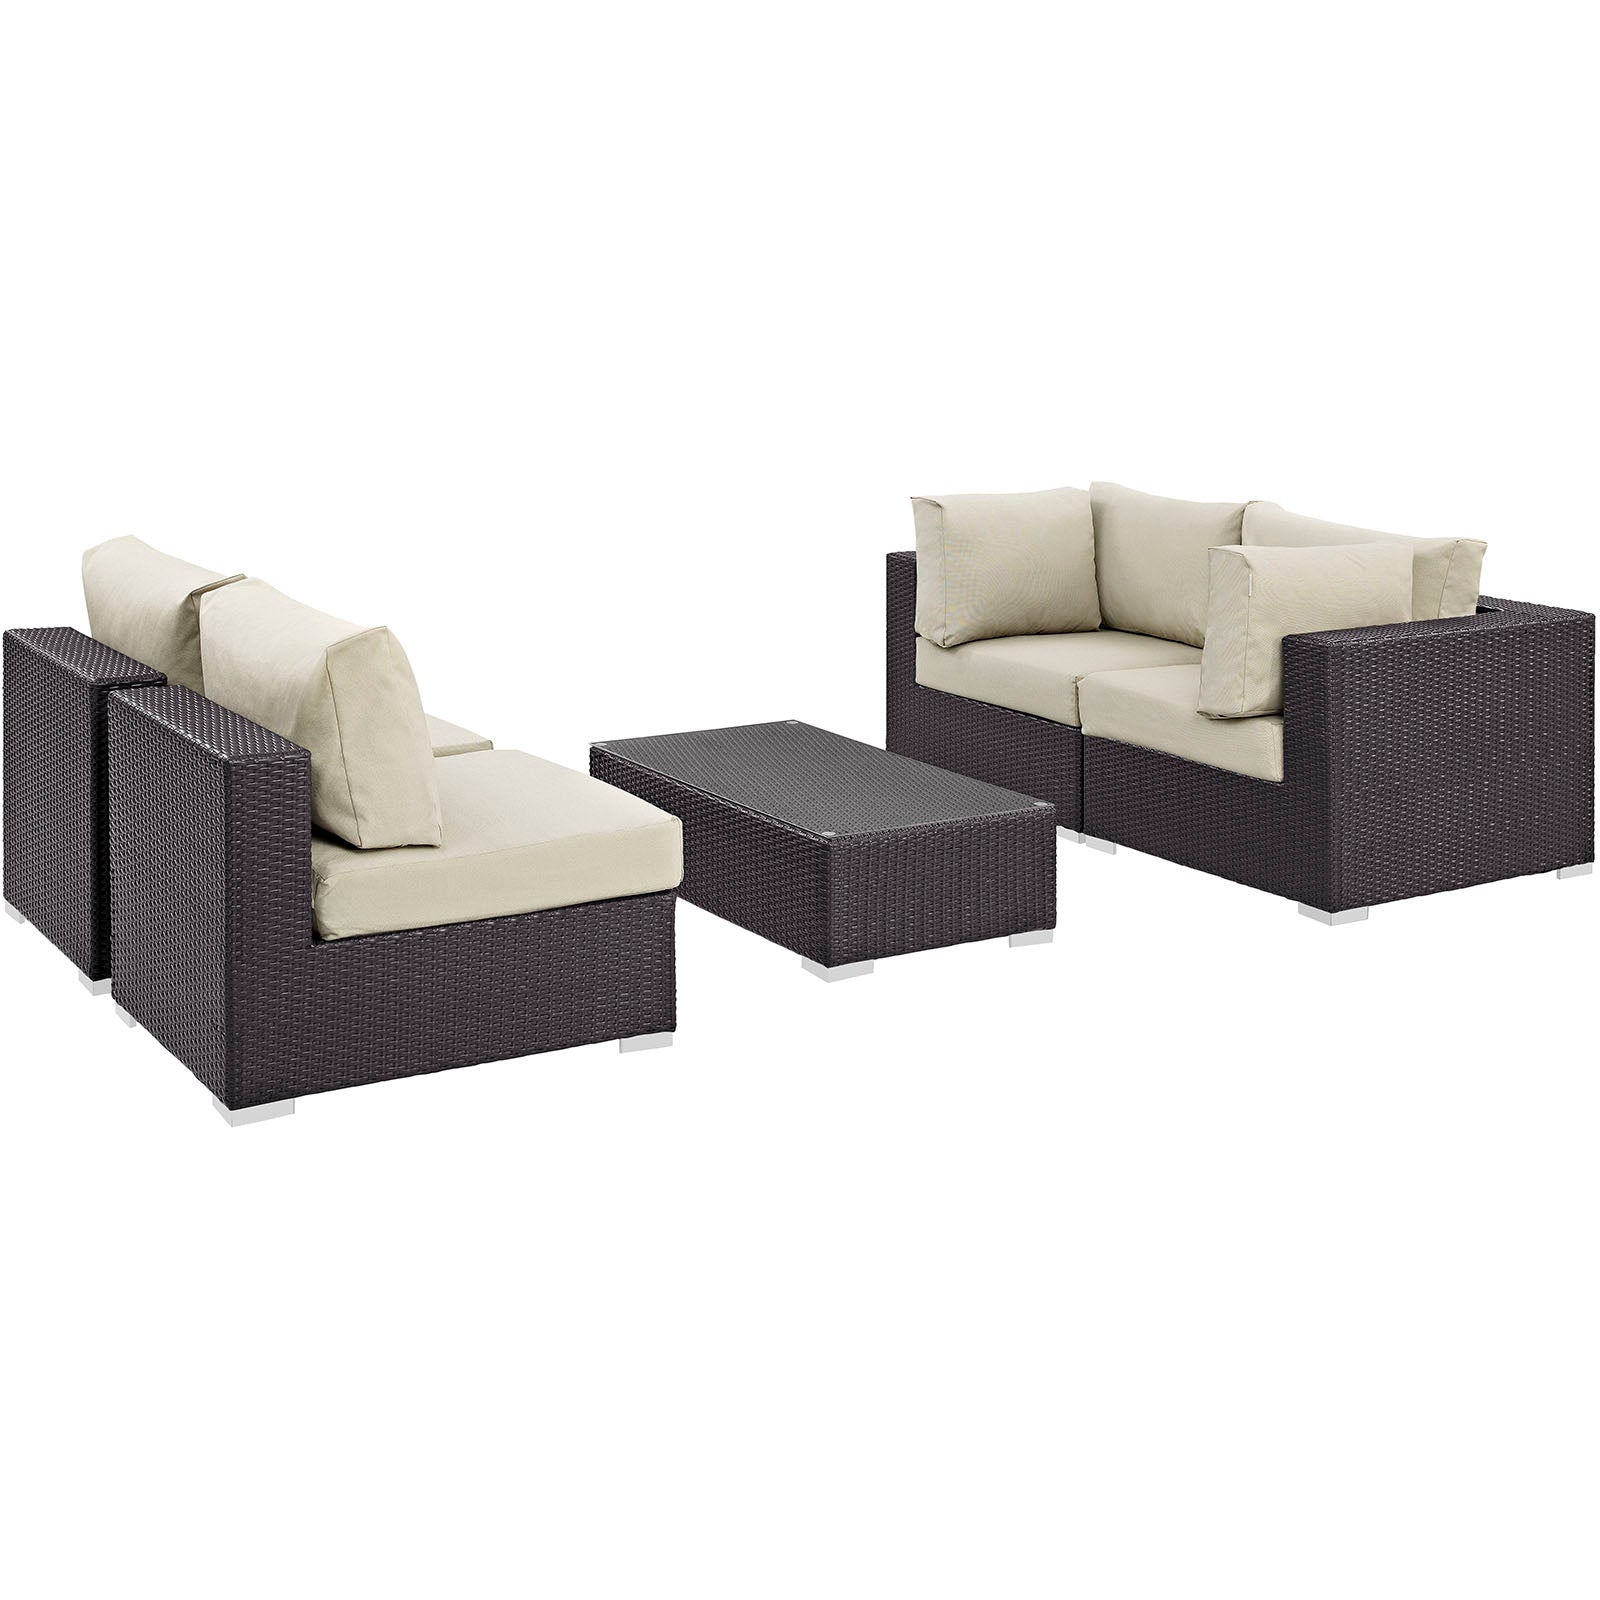 Convene 5 Piece Outdoor Patio Sectional W/ Two Armless Chair Set